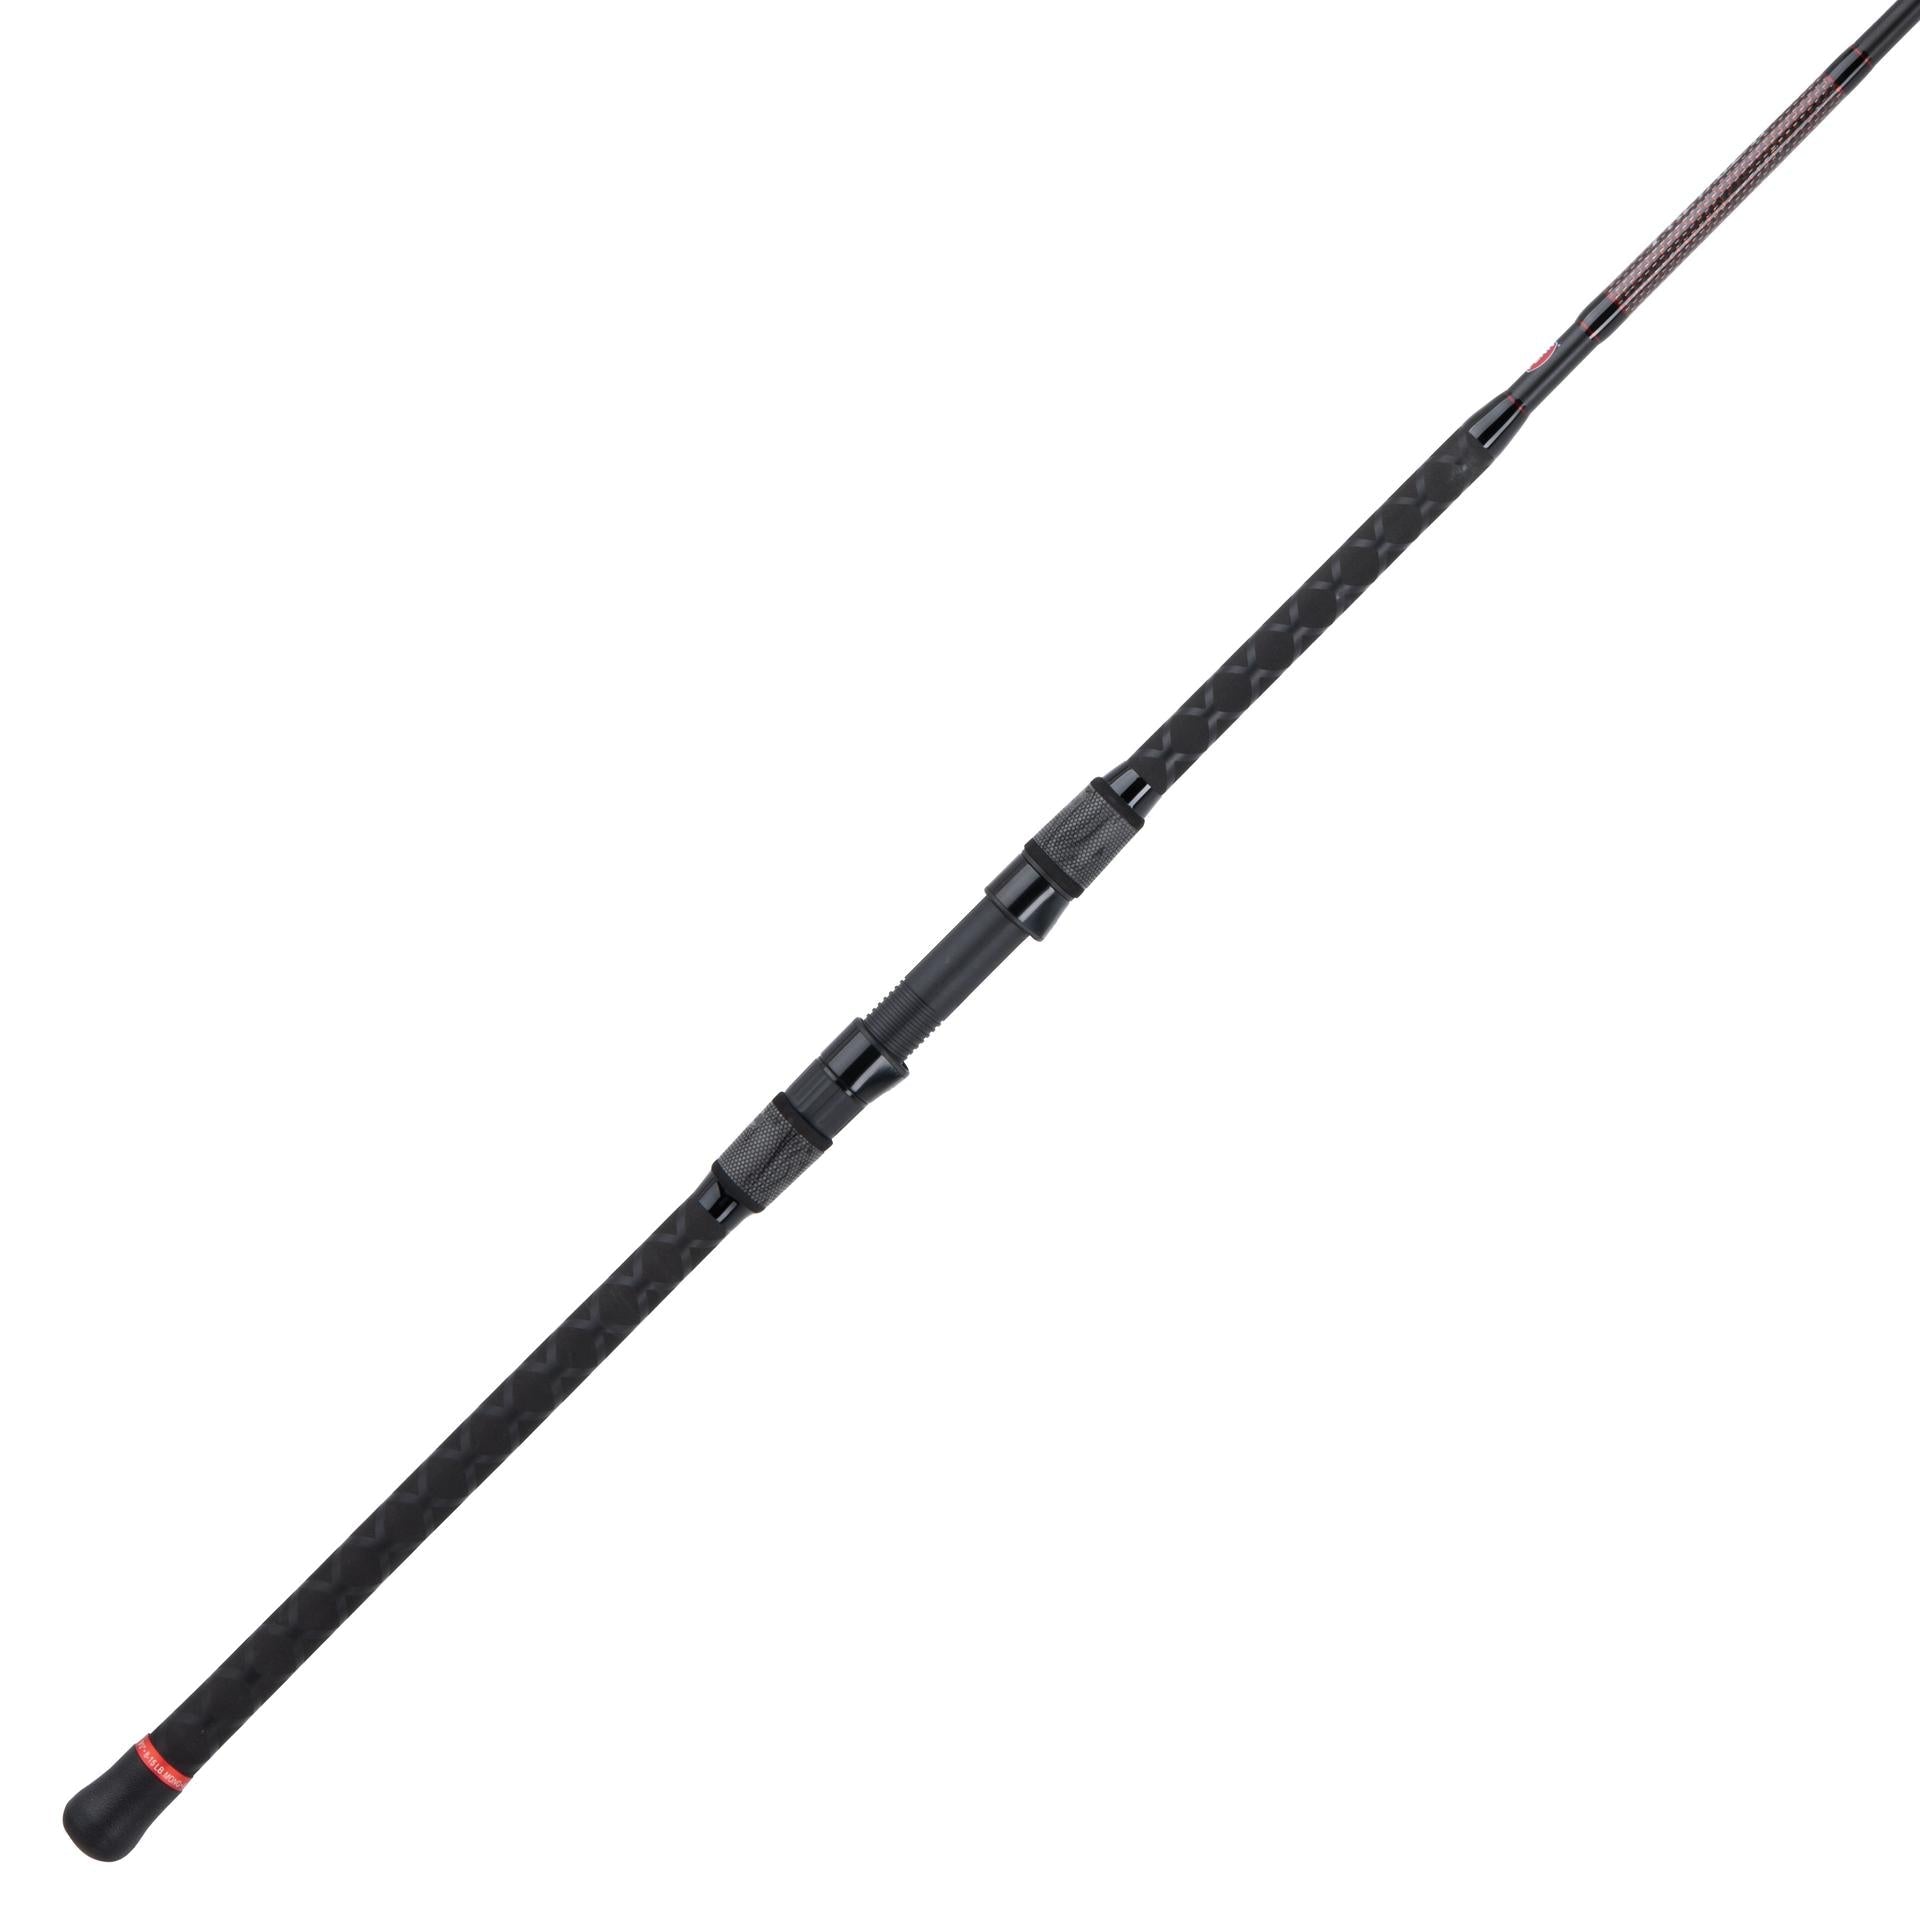 Saltwater Fishing Rod Casting Fishing Rods & Poles 2 for sale